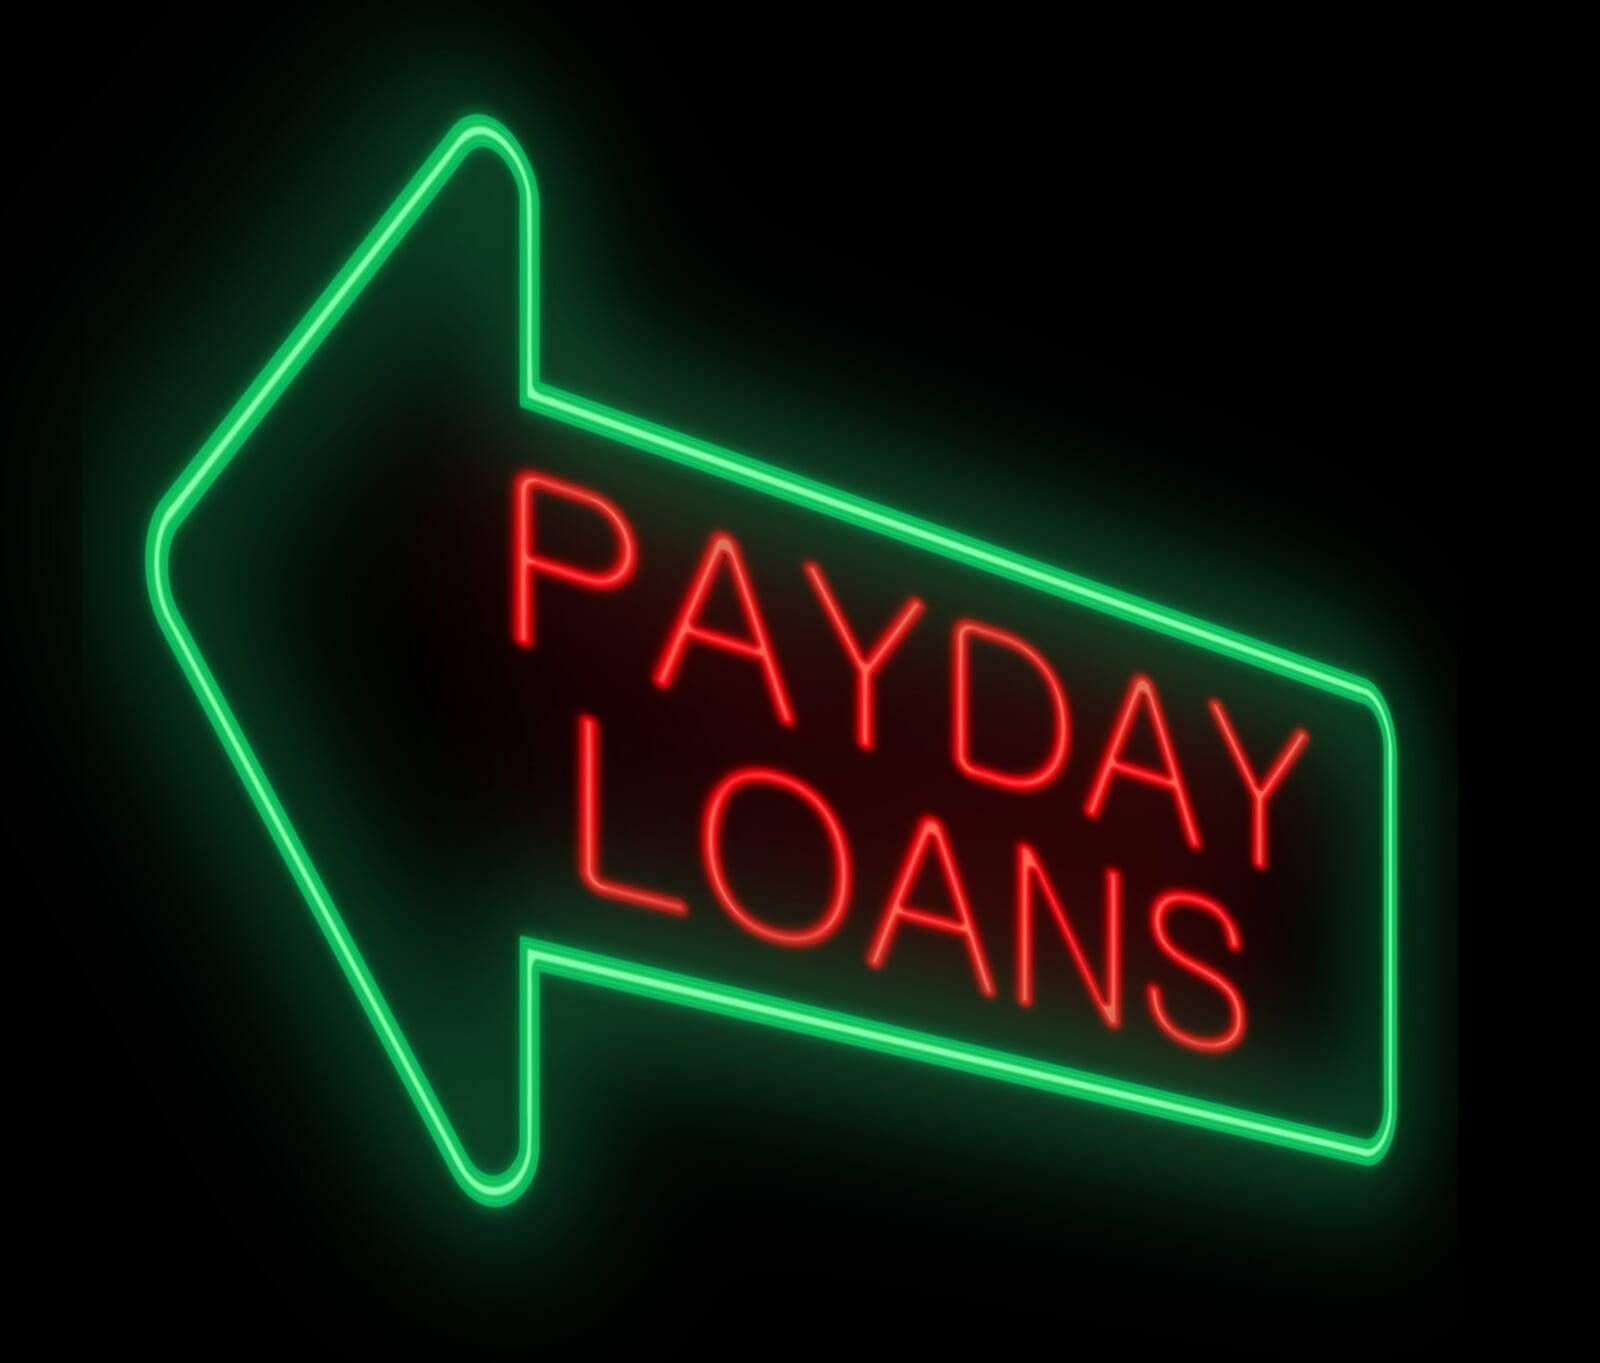 36% Service Fee Cap On Payday Loans Moves